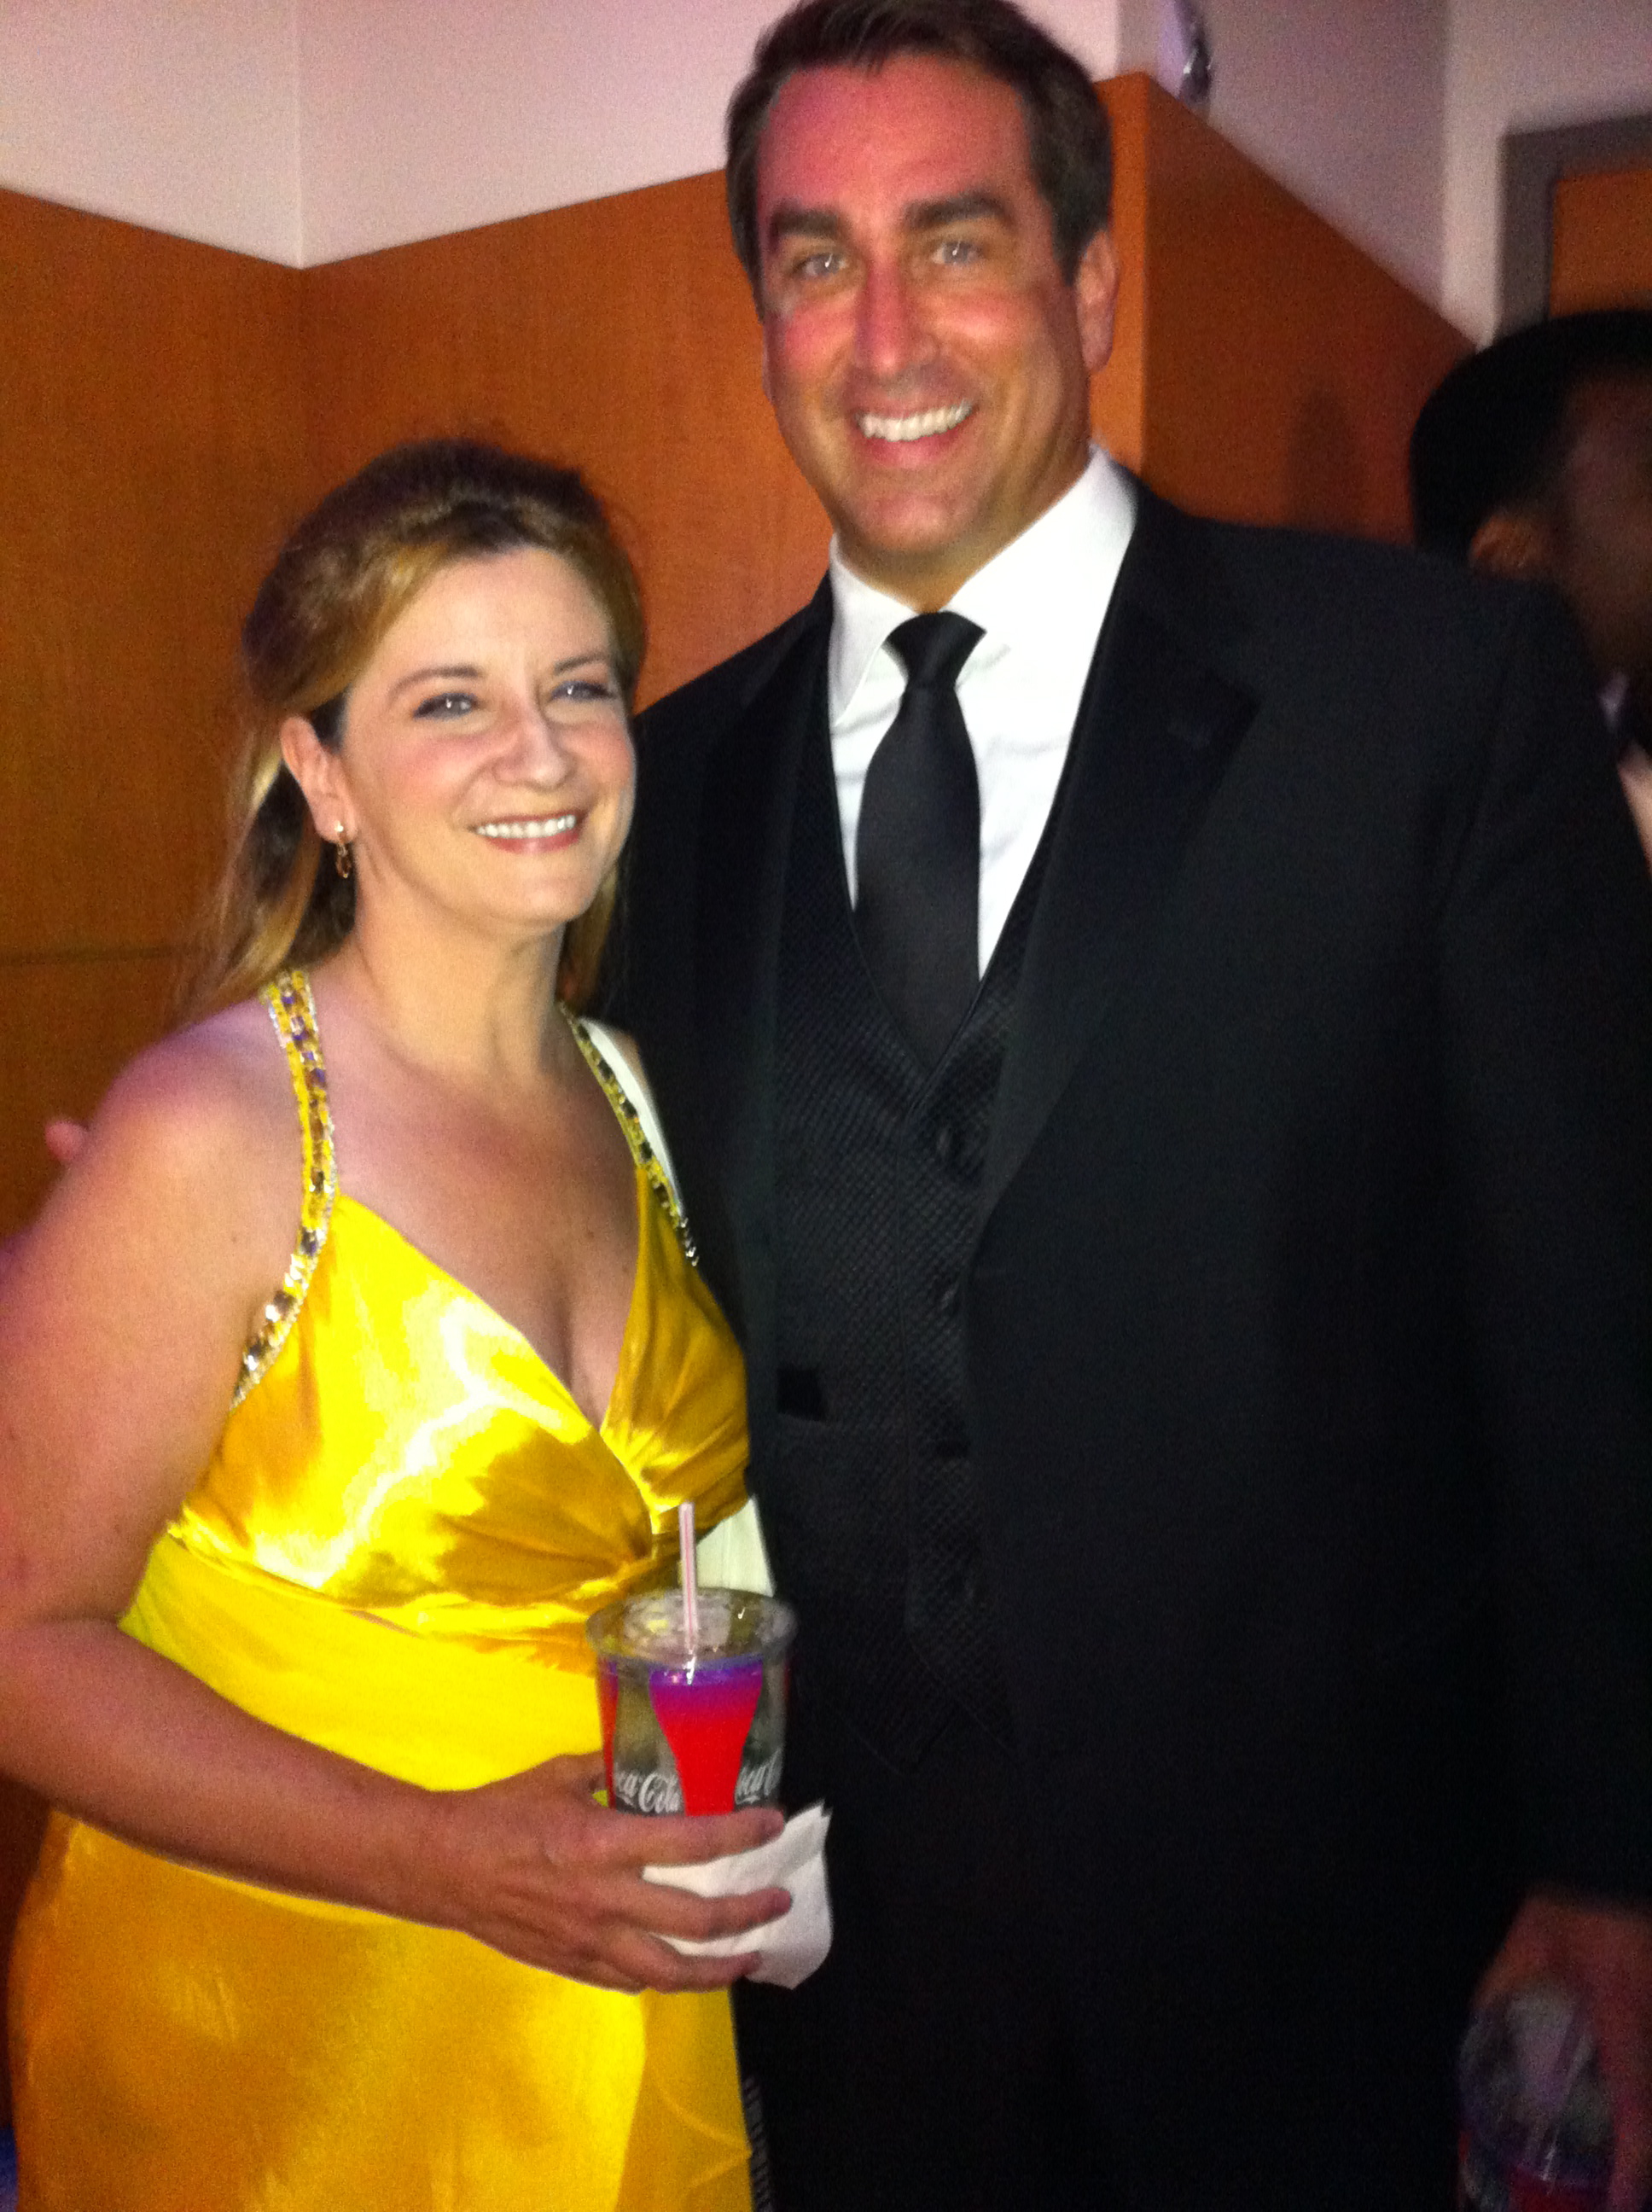 At the 2010 Emmys with Rob Riggle